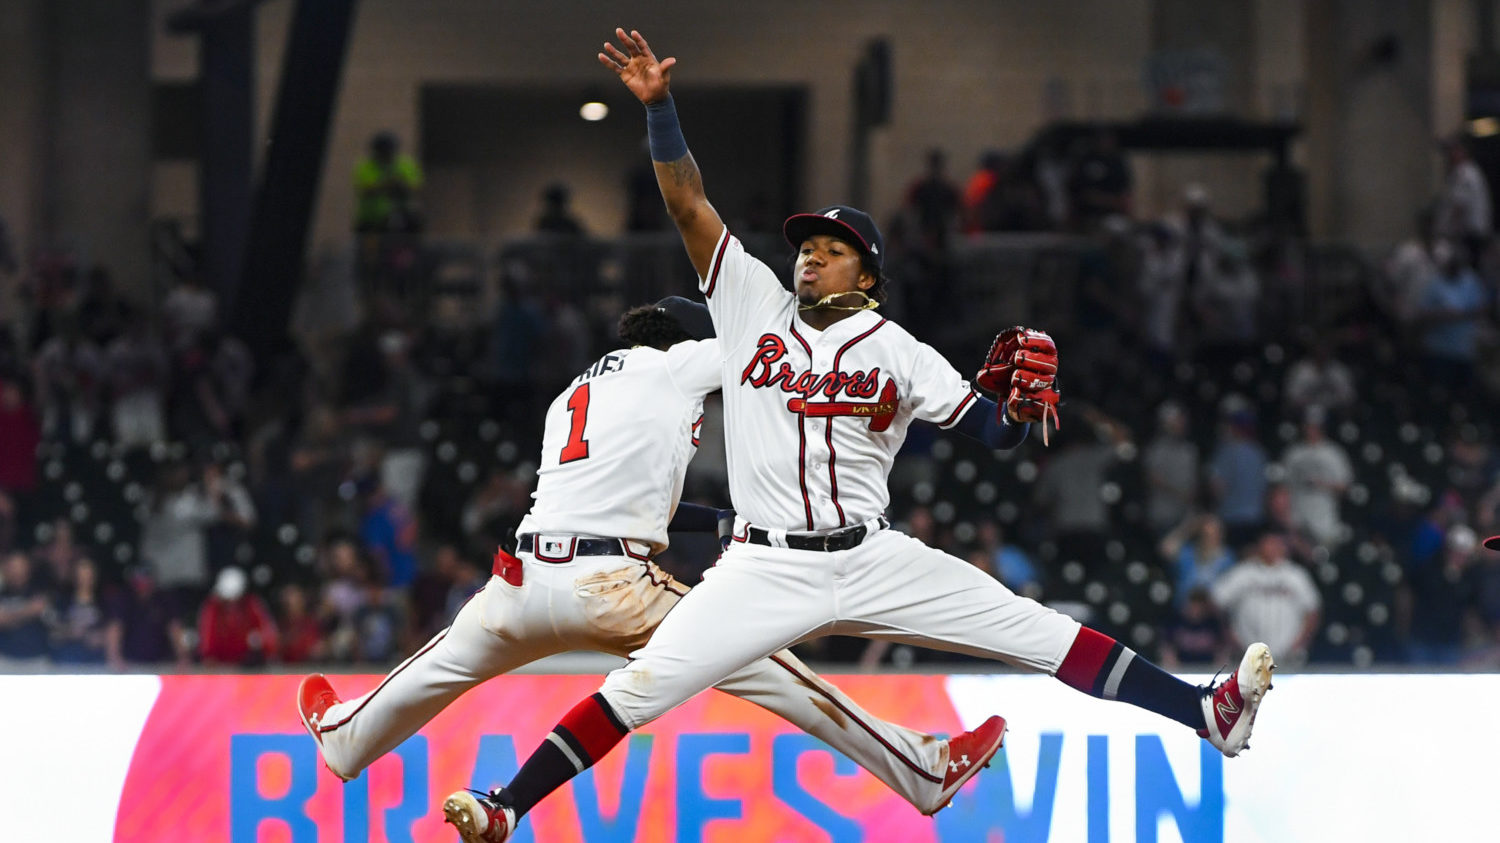 Betting on the Braves: An Investment…